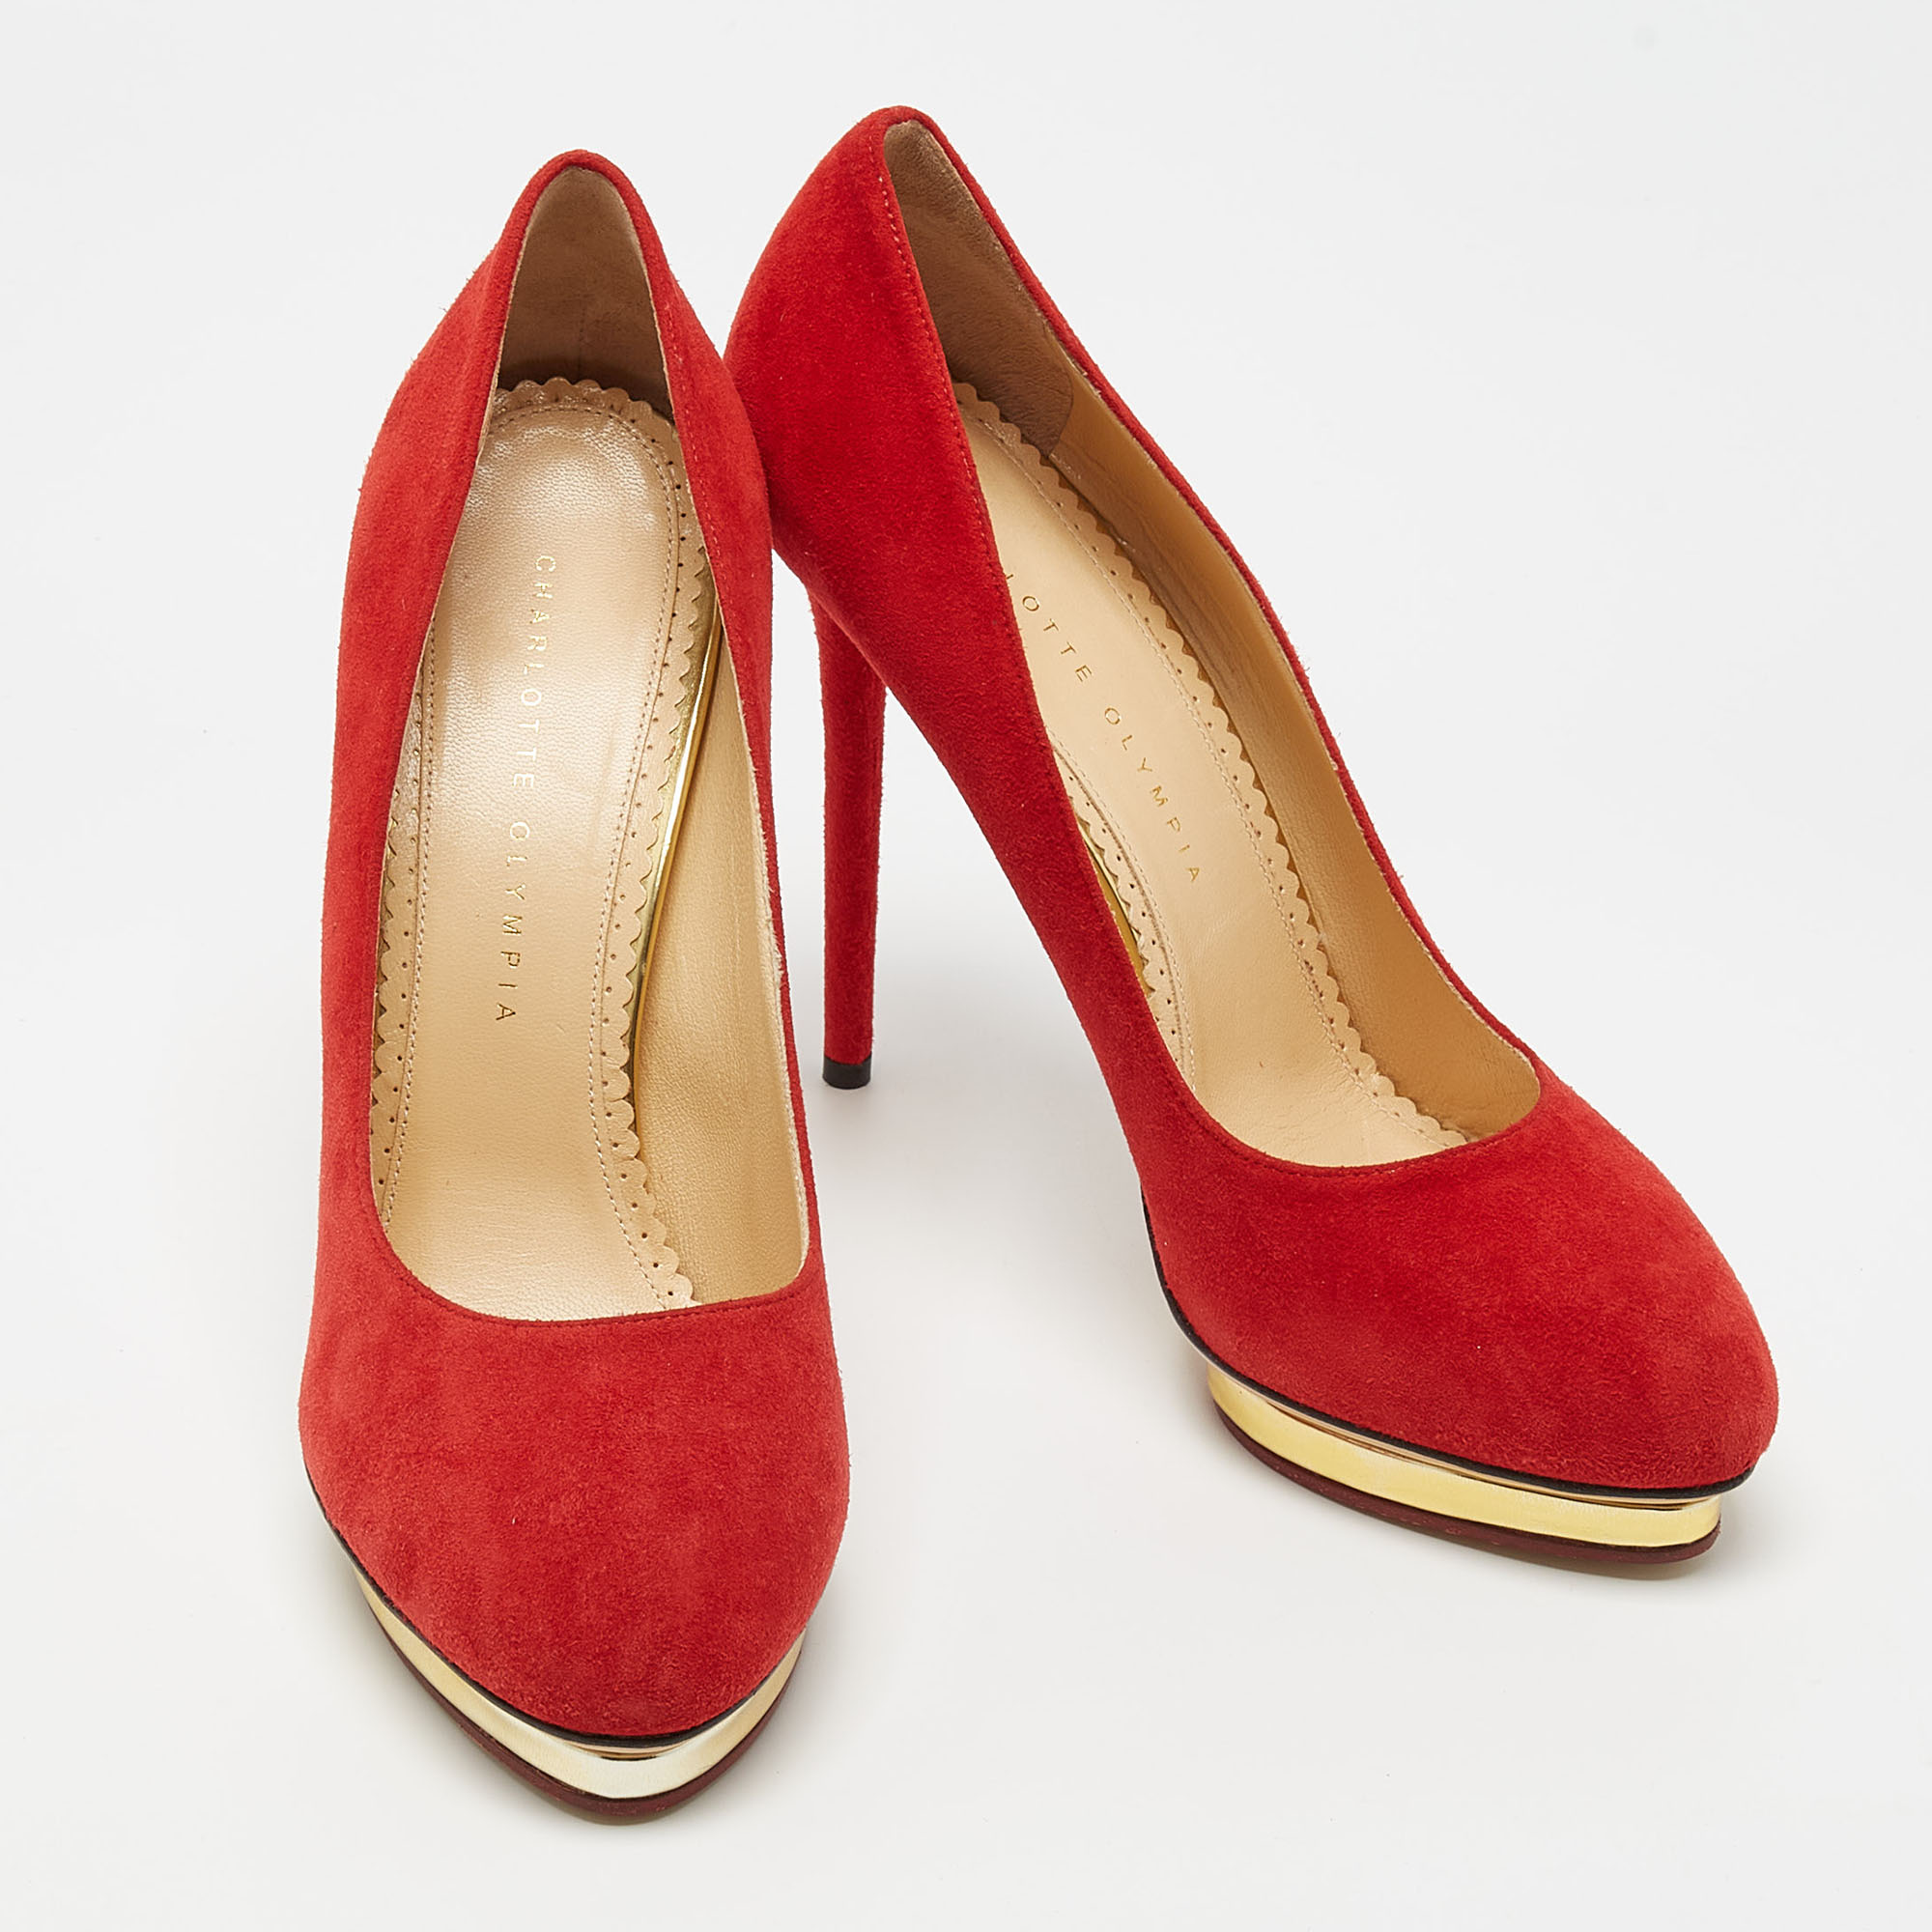 Charlotte Olympia Red Suede Debbie Pumps Size 40.5